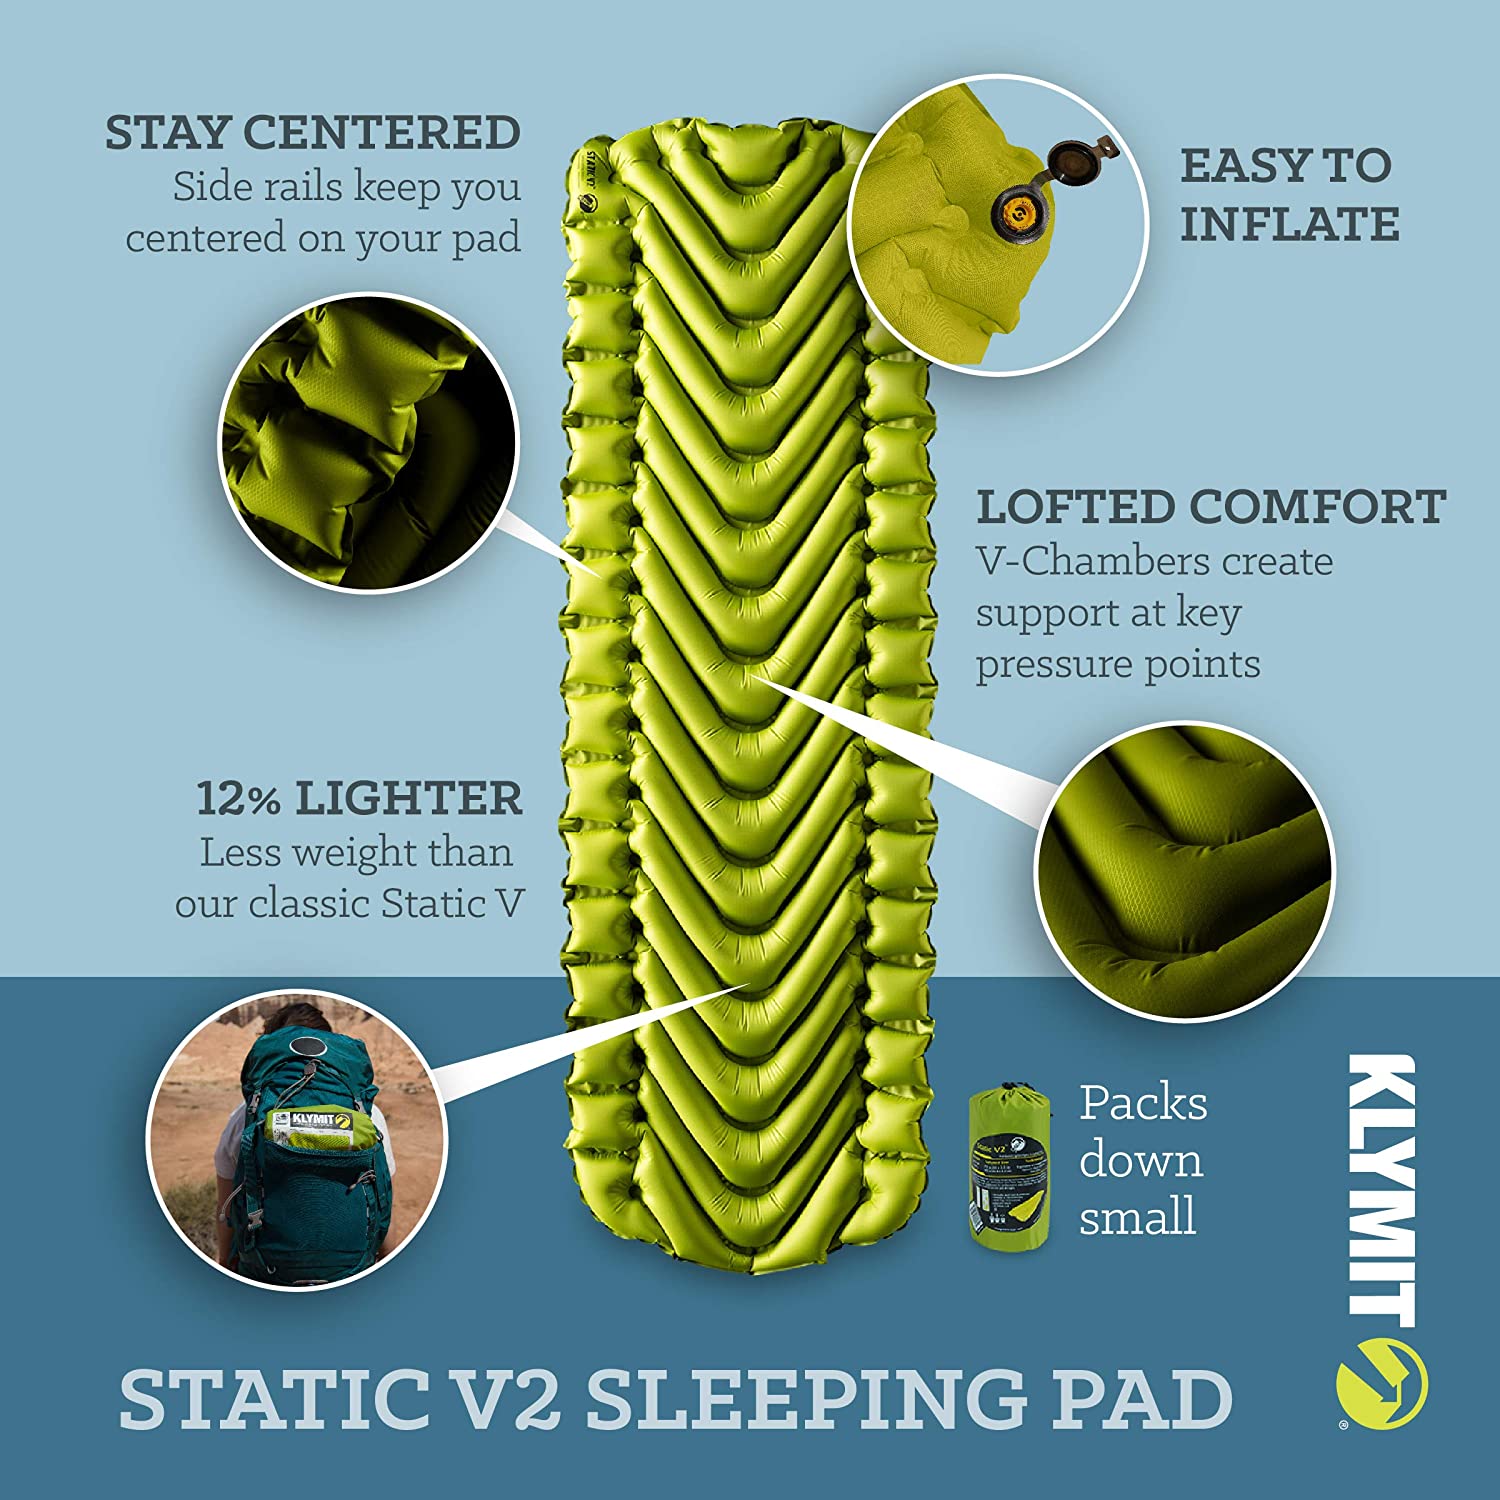 Klymit, KLYMIT Static V2 Sleeping Pad, Ultralight, (12% Lighter), Great for Camping, Hiking, Travel and Backpacking